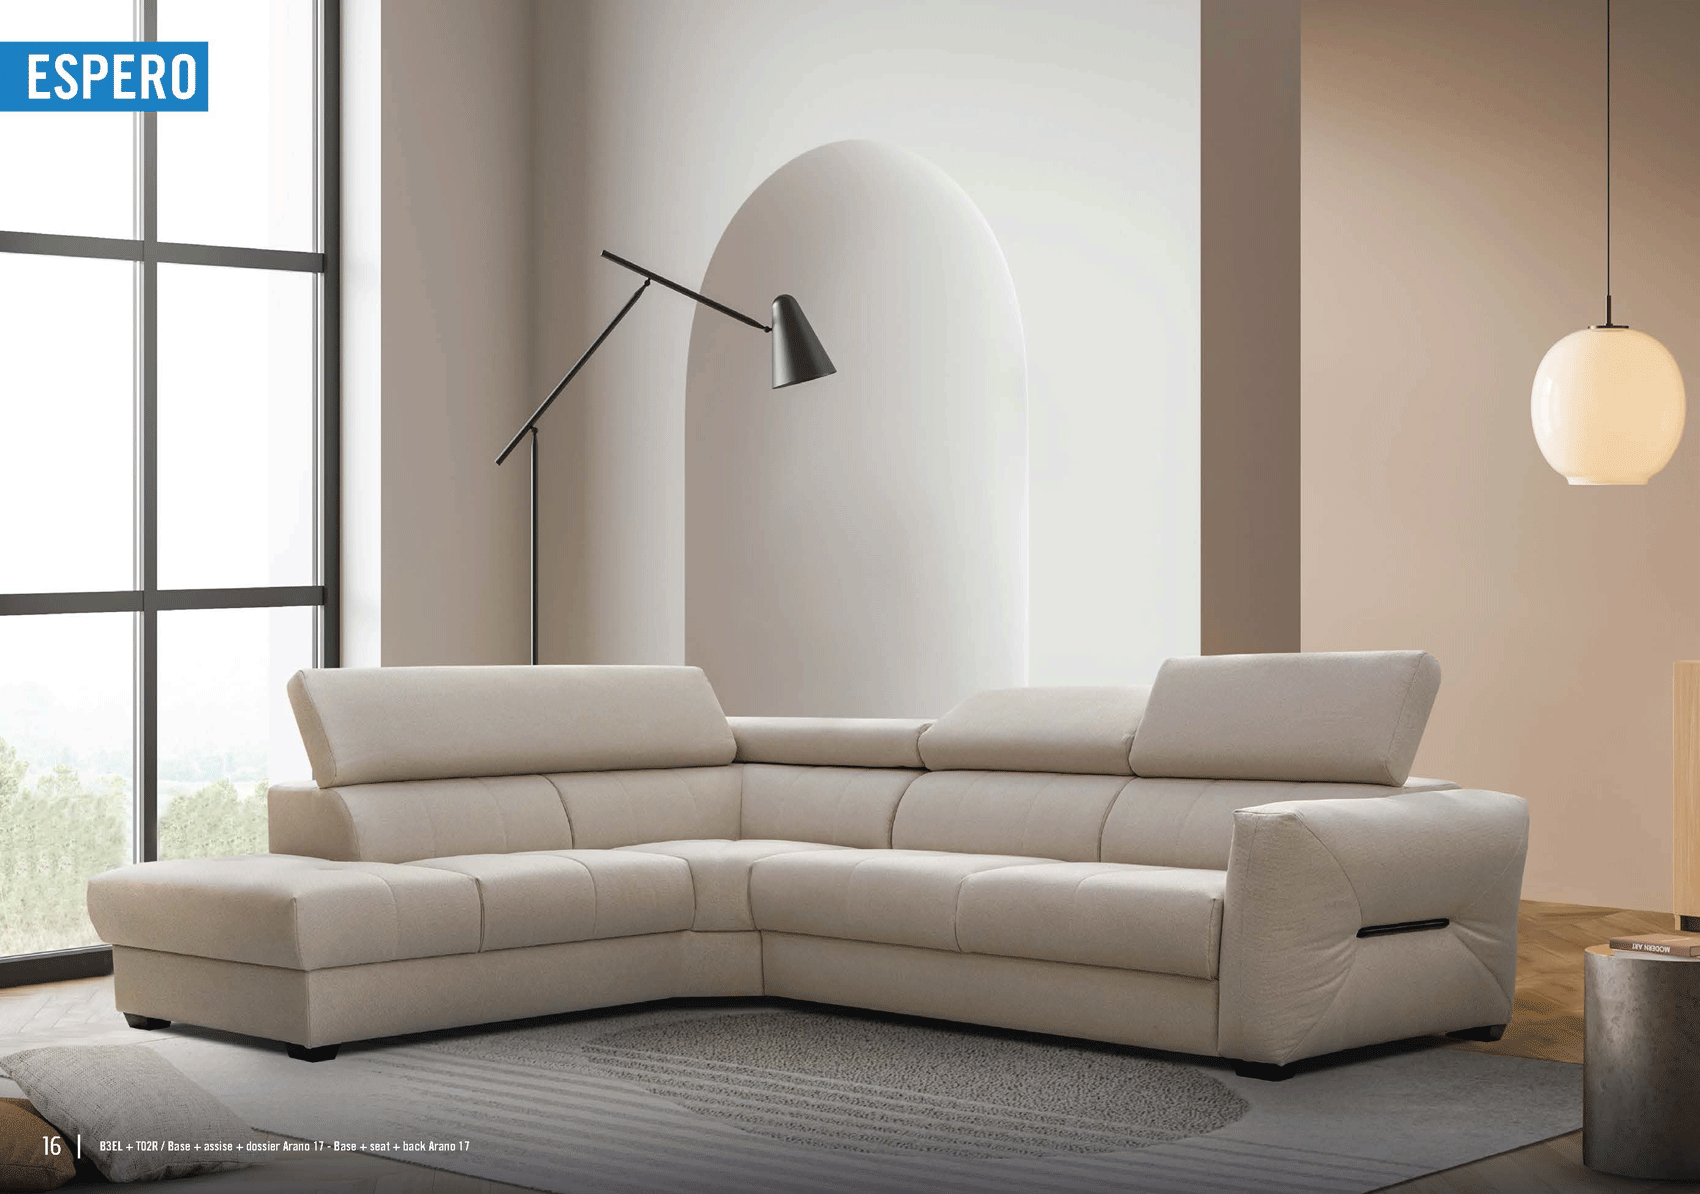 Brands Arredoclassic Living Room, Italy Espero Sectional